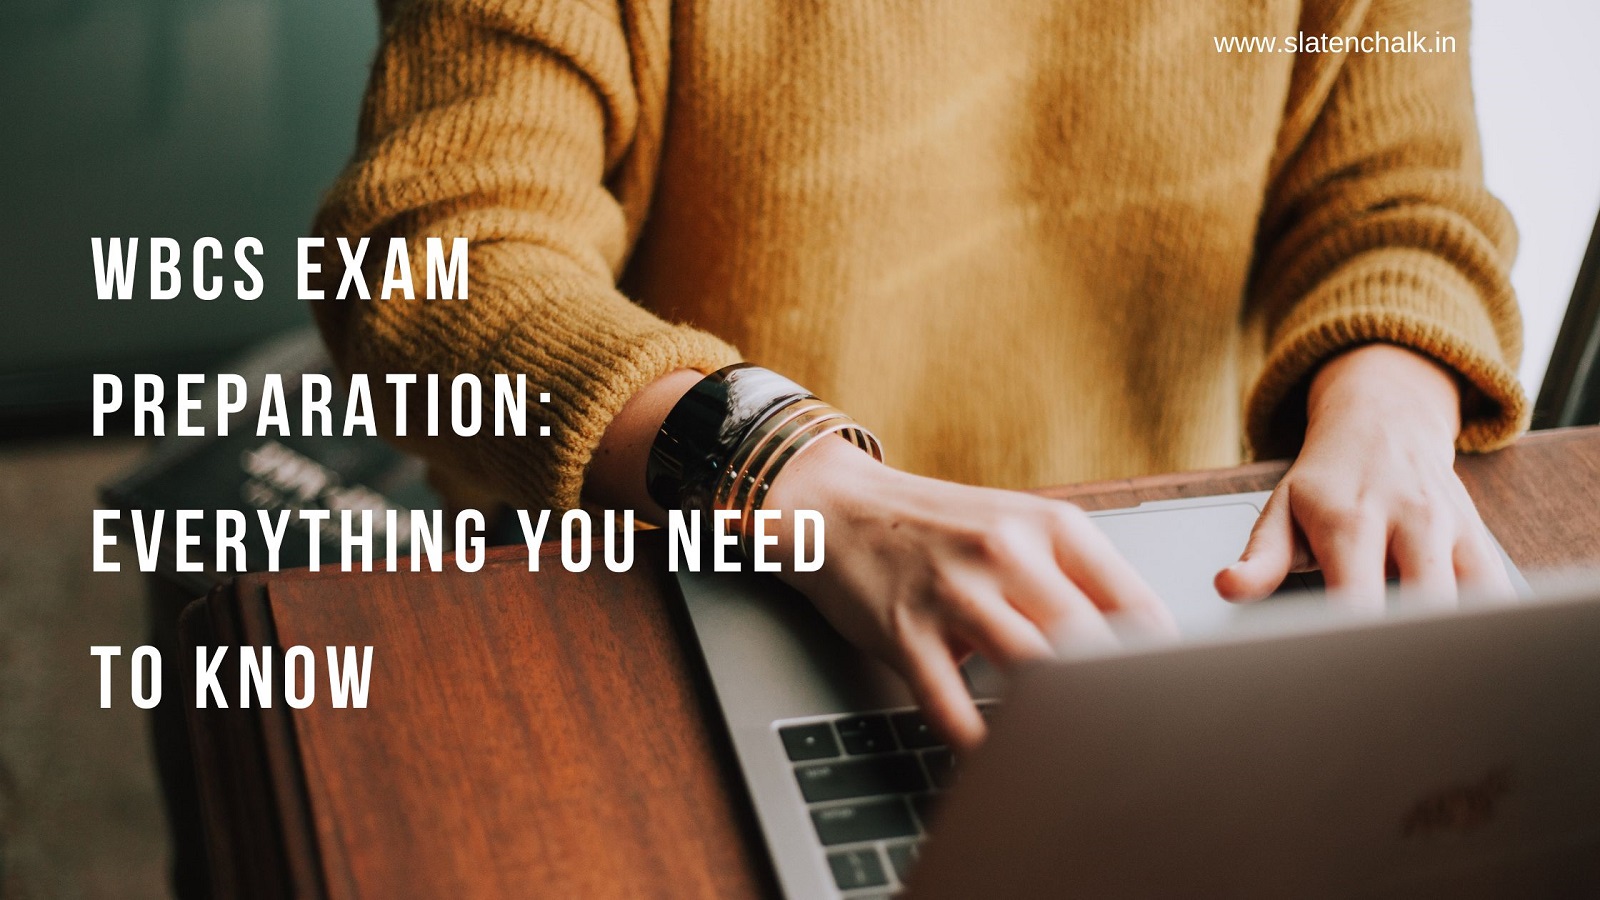 WBCS Exam Preparation: Everything You Need to Know